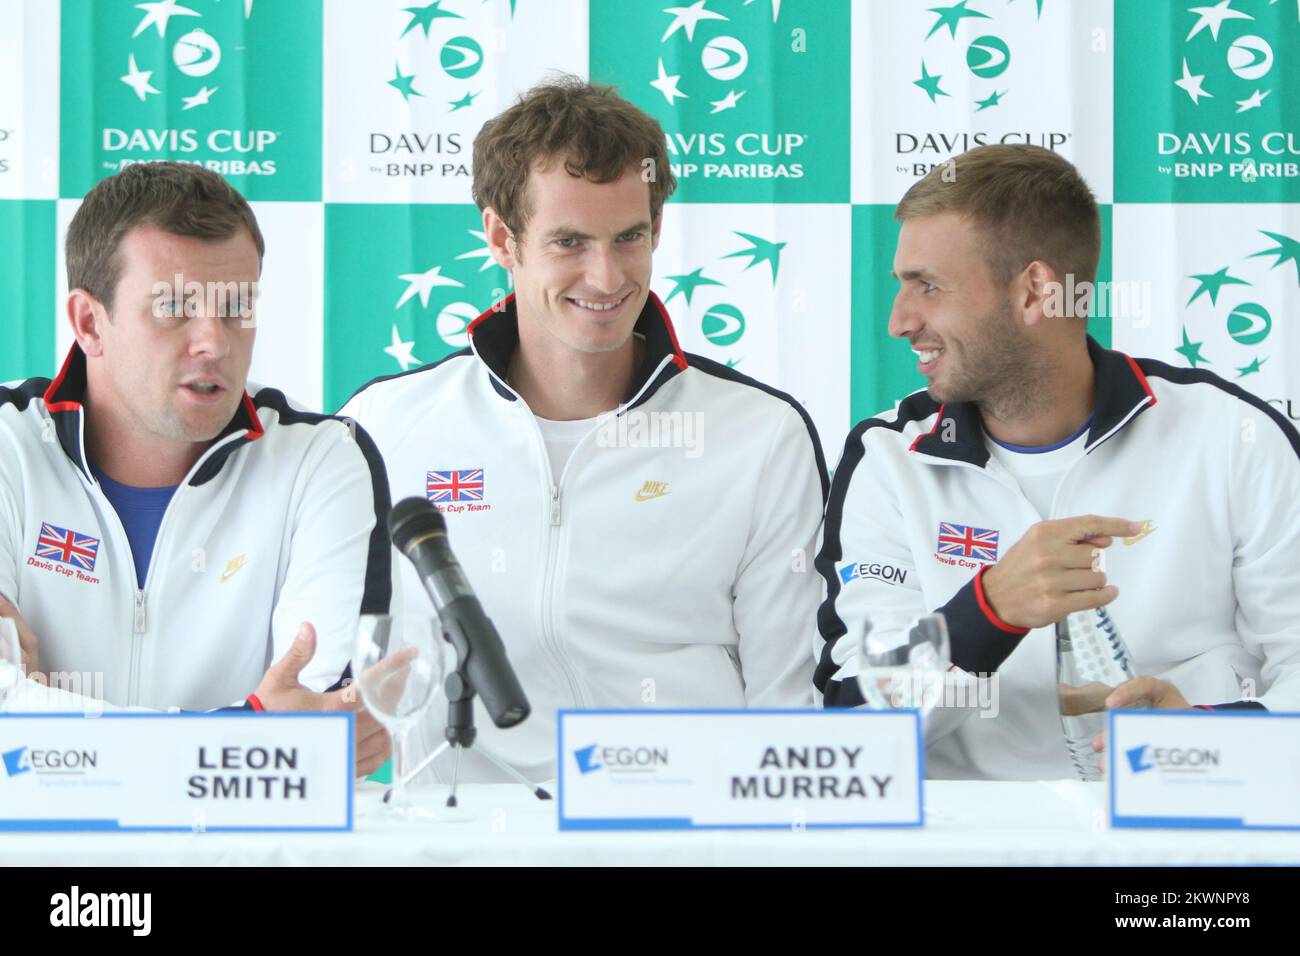 11.09.2013. Croatia, Umag - Press conference of British tennis team ahead of Davis Cup which is due to bad weather delayed more than an hour. Andy Murray,  Leon Smith,  Dave Evans    Photo: Nel Pavletic/PIXSELL Stock Photo